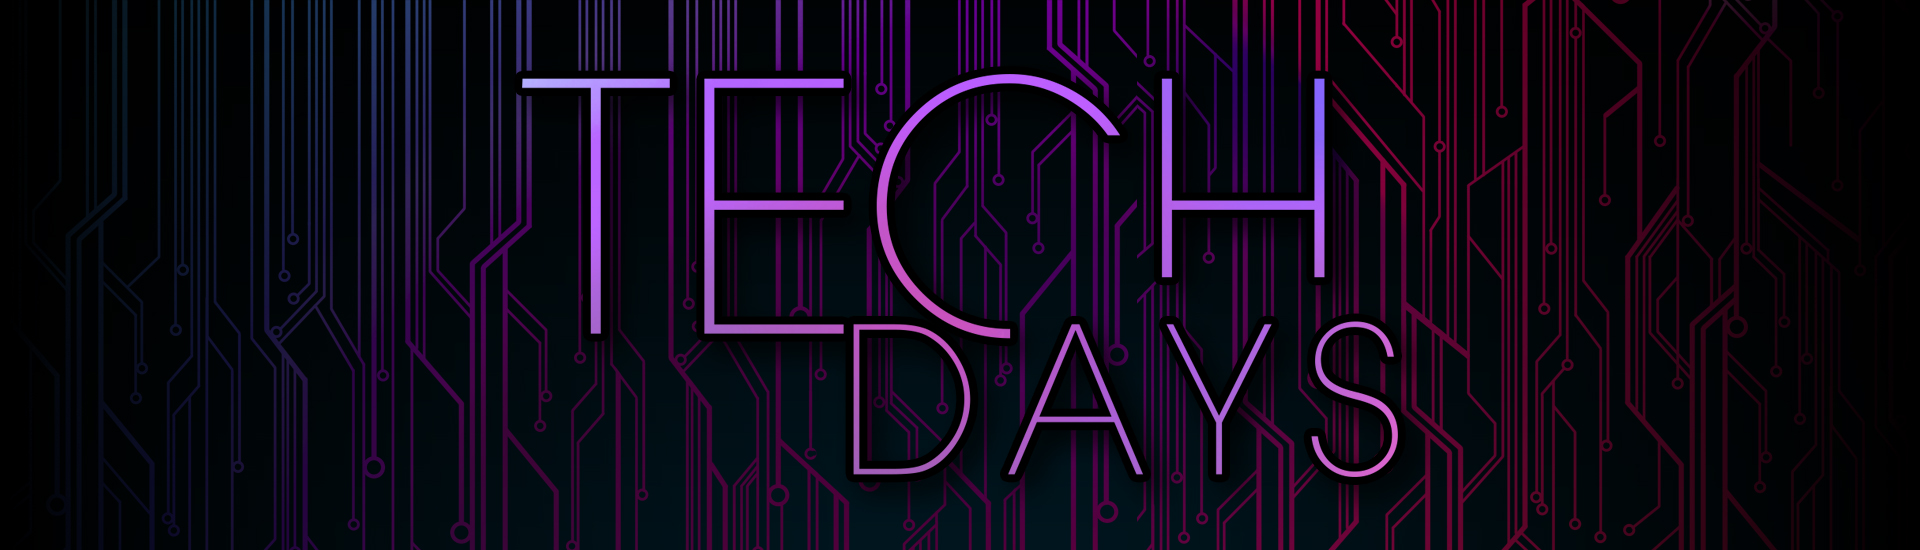 tech days 2018 graphic